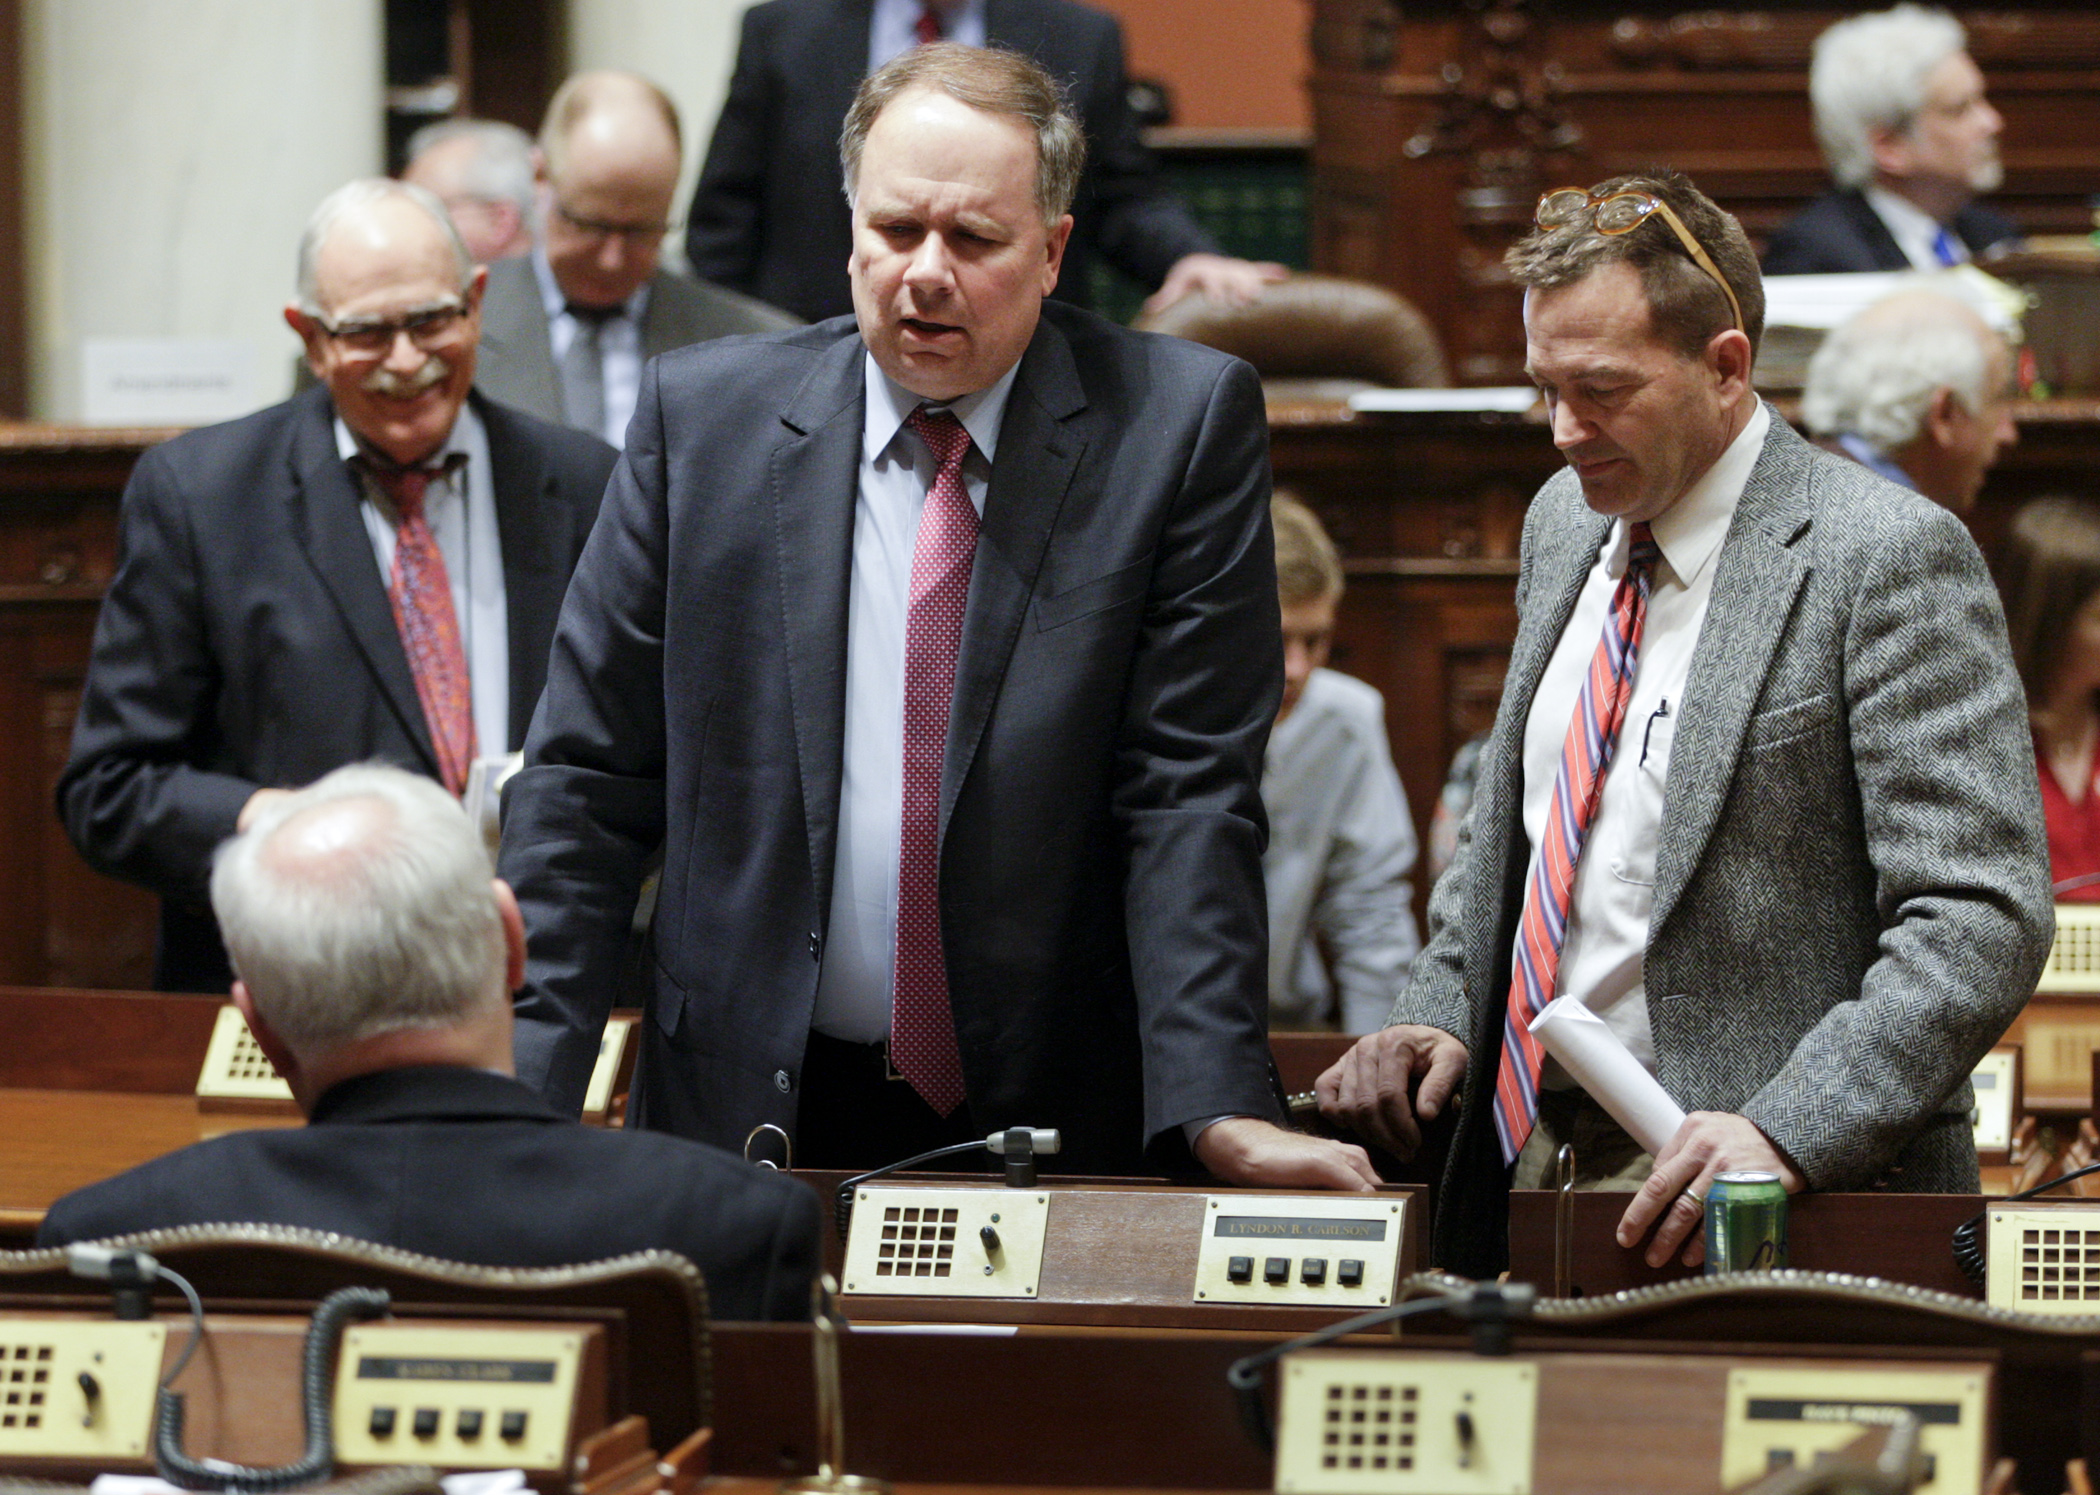 Rep. Jim Knoblach, center, confers with Reps. Lyndon Carlson Sr., left, and Leon Lillie after the March 16 House Floor session. Photo by Paul Battaglia